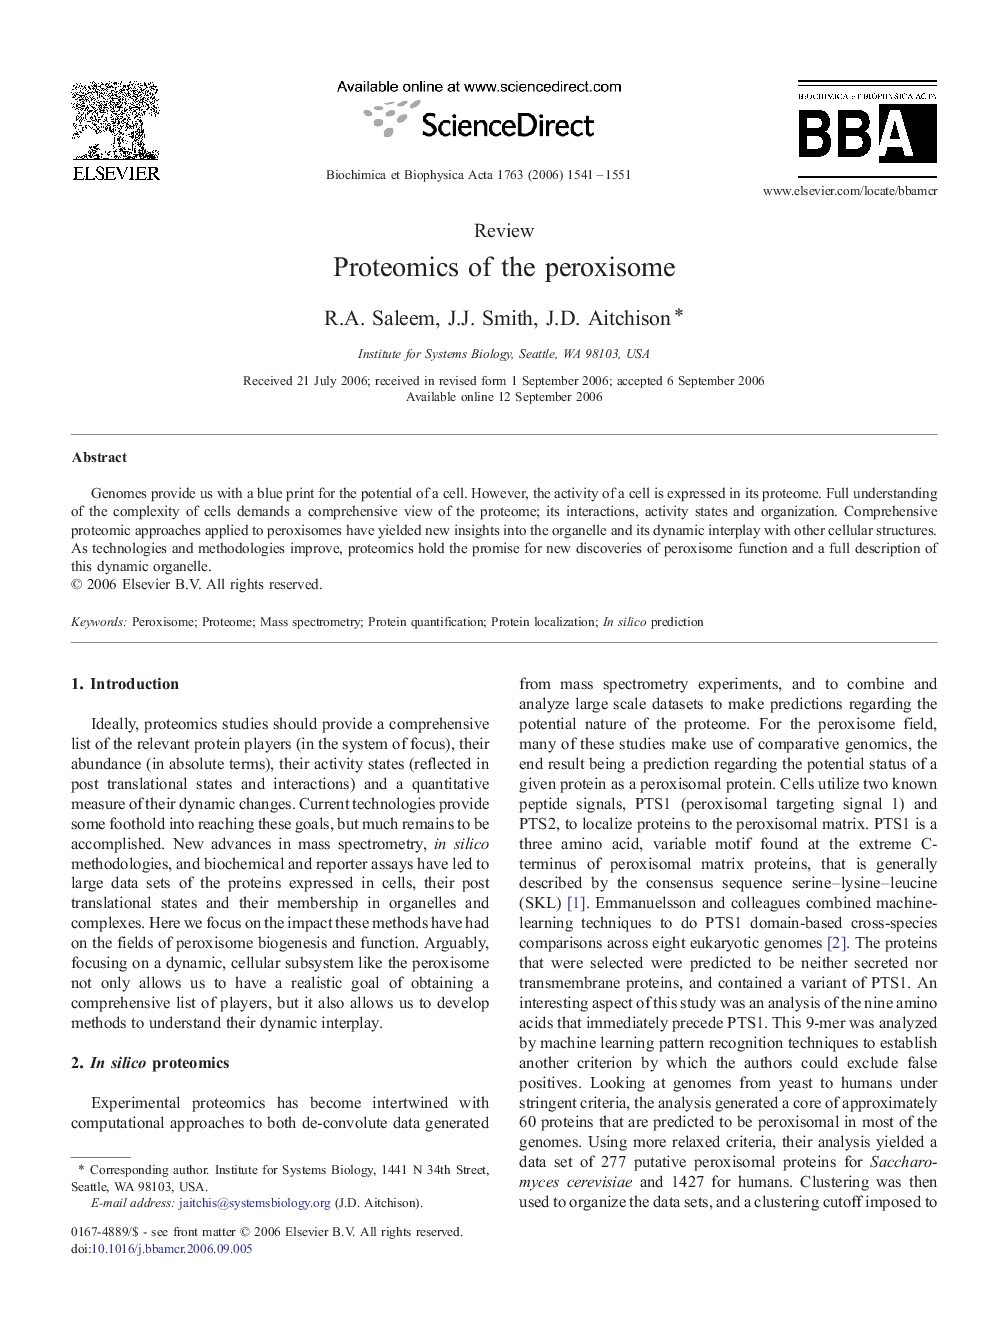 Proteomics of the peroxisome